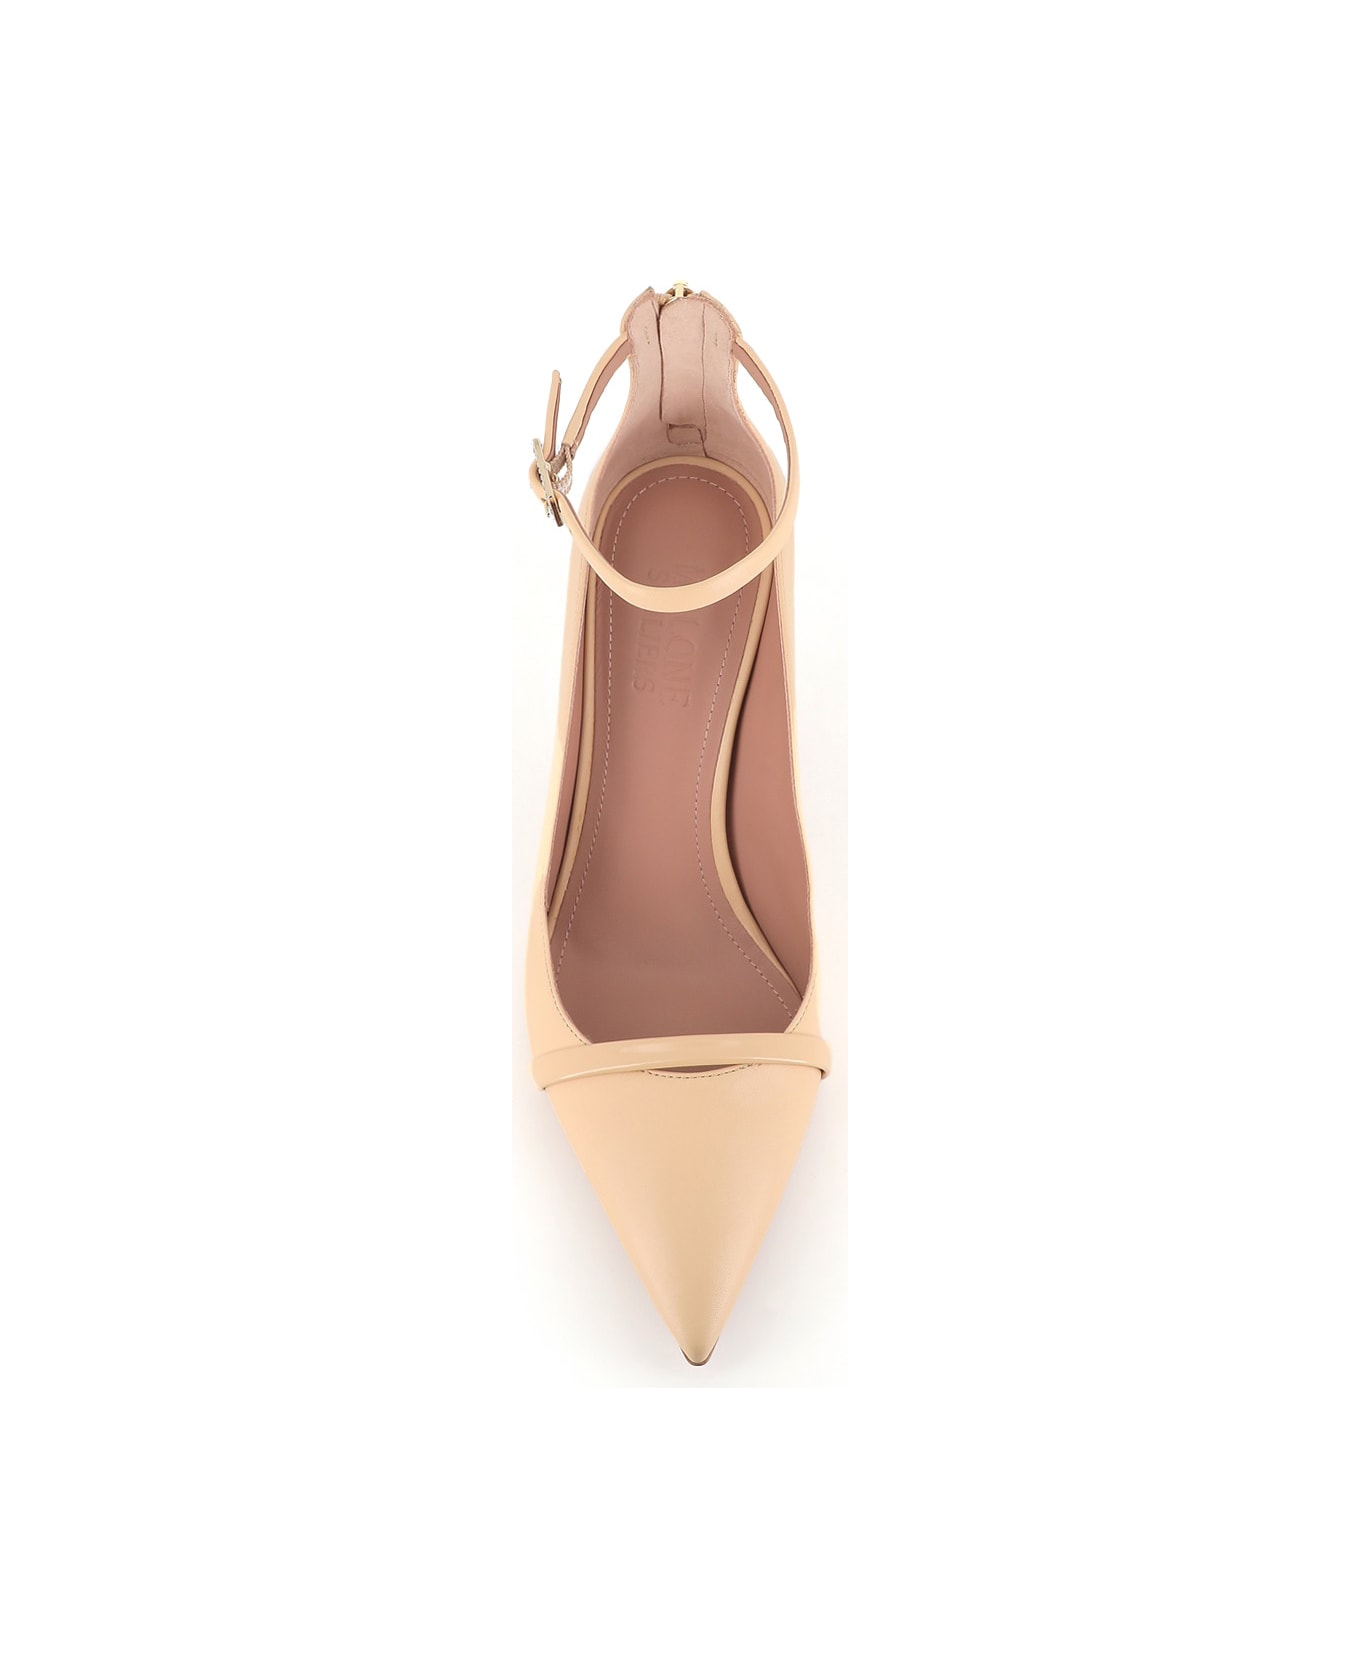 Malone Souliers Décolleté Rory 80-2 - Cream ハイヒール